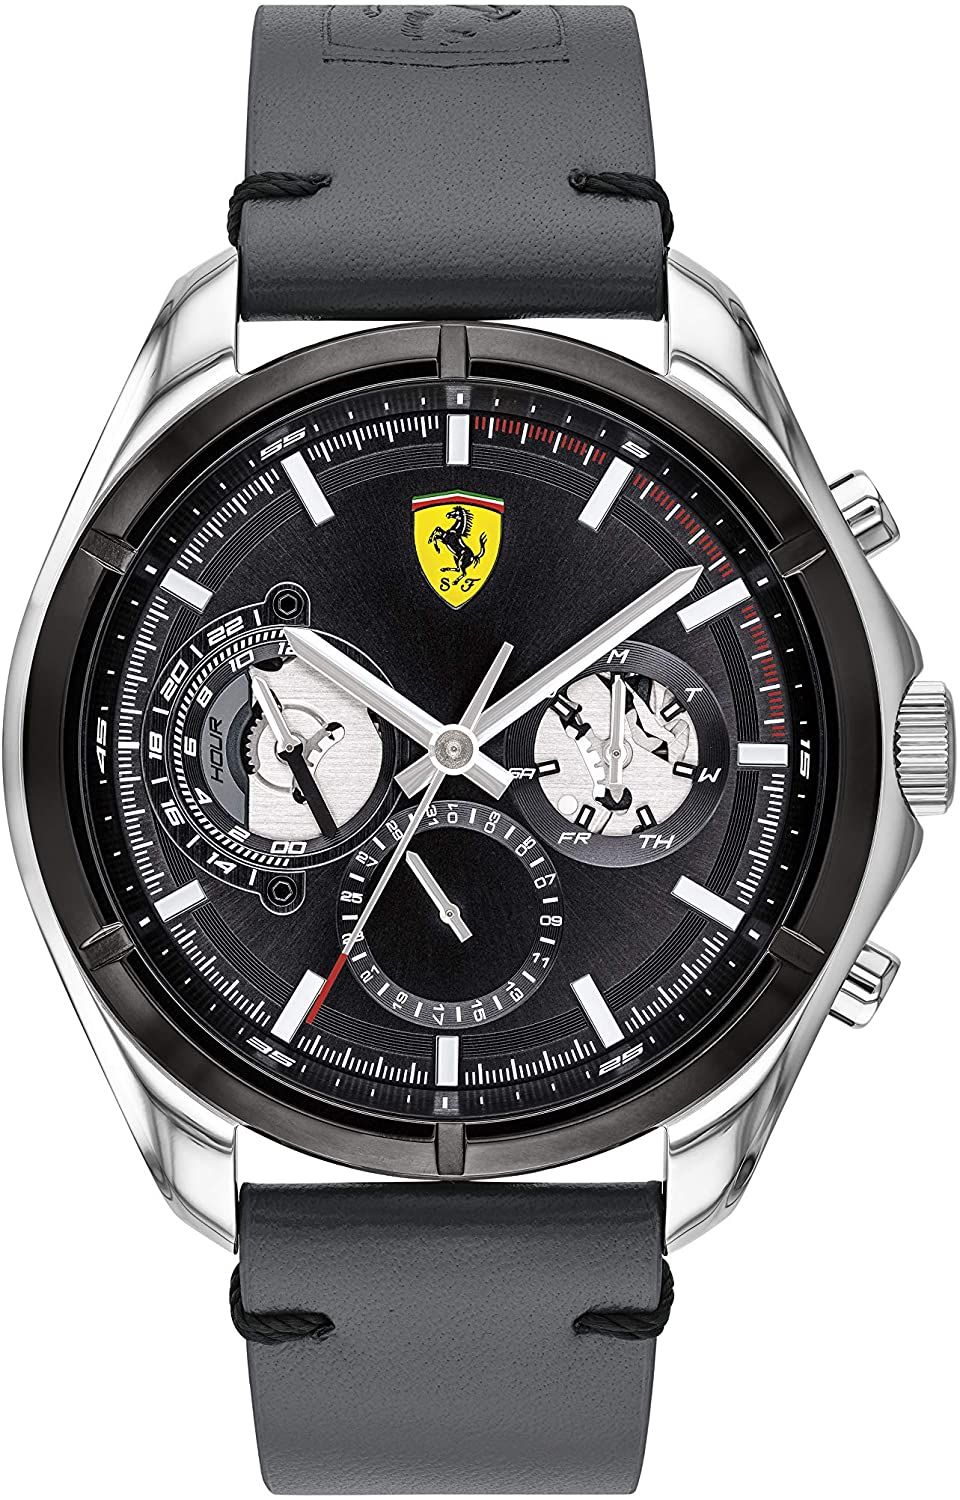 This Ferrari Speedracer Multi Dial Watch for Men is the perfect timepiece to wear or to gift. It's Silver 44 mm Round case combined with the comfortable Grey Leather will ensure you enjoy this stunning timepiece without any compromise. Operated by a high quality Quartz movement and water resistant to 5 bars, your watch will keep ticking. This watch gives you a comfortable feeling with its leather strap, it's perfect for every occasion -The watch has a Calendar function: Day-Date, 24-hour Display High quality 21 cm length and  21 mm width Grey Leather strap with a Buckle Case diameter: 44 mm,case thickness: 10 mm, case colour: Silver and dial colour: Black